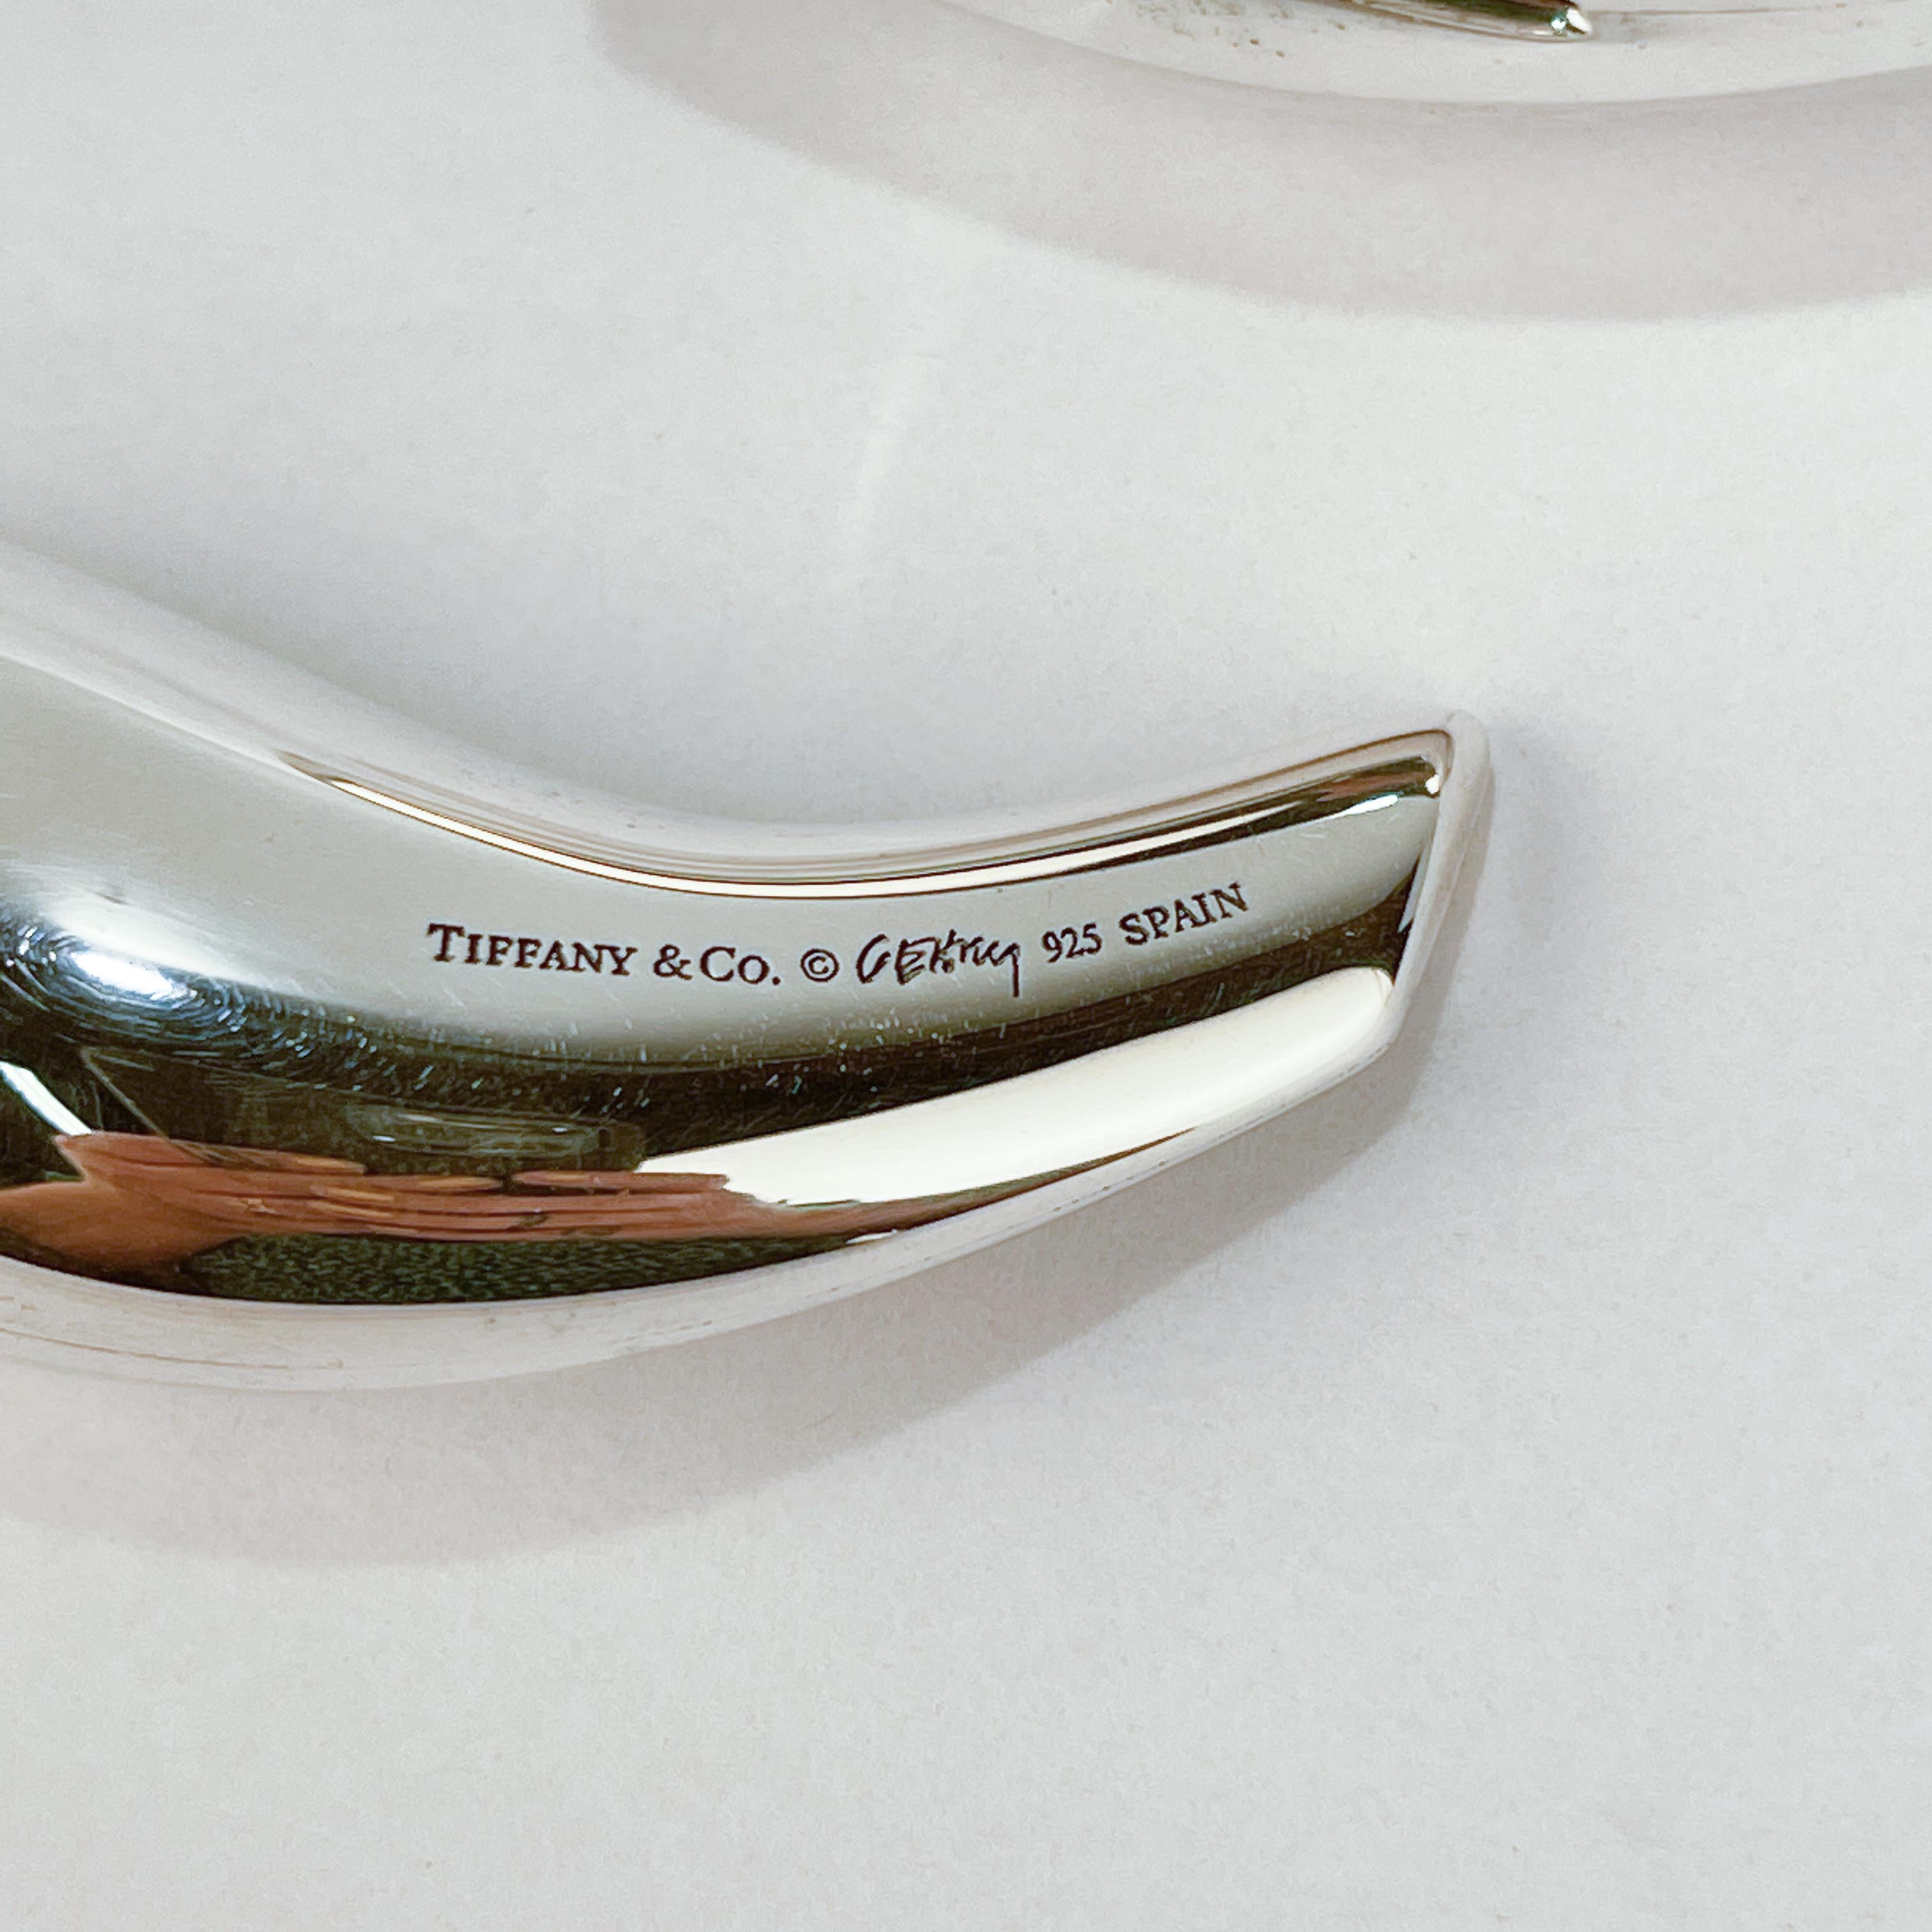 Tiffany & Co. Sterling Silver 'Fish' Salt & Pepper Shakers by Frank Gehry 2